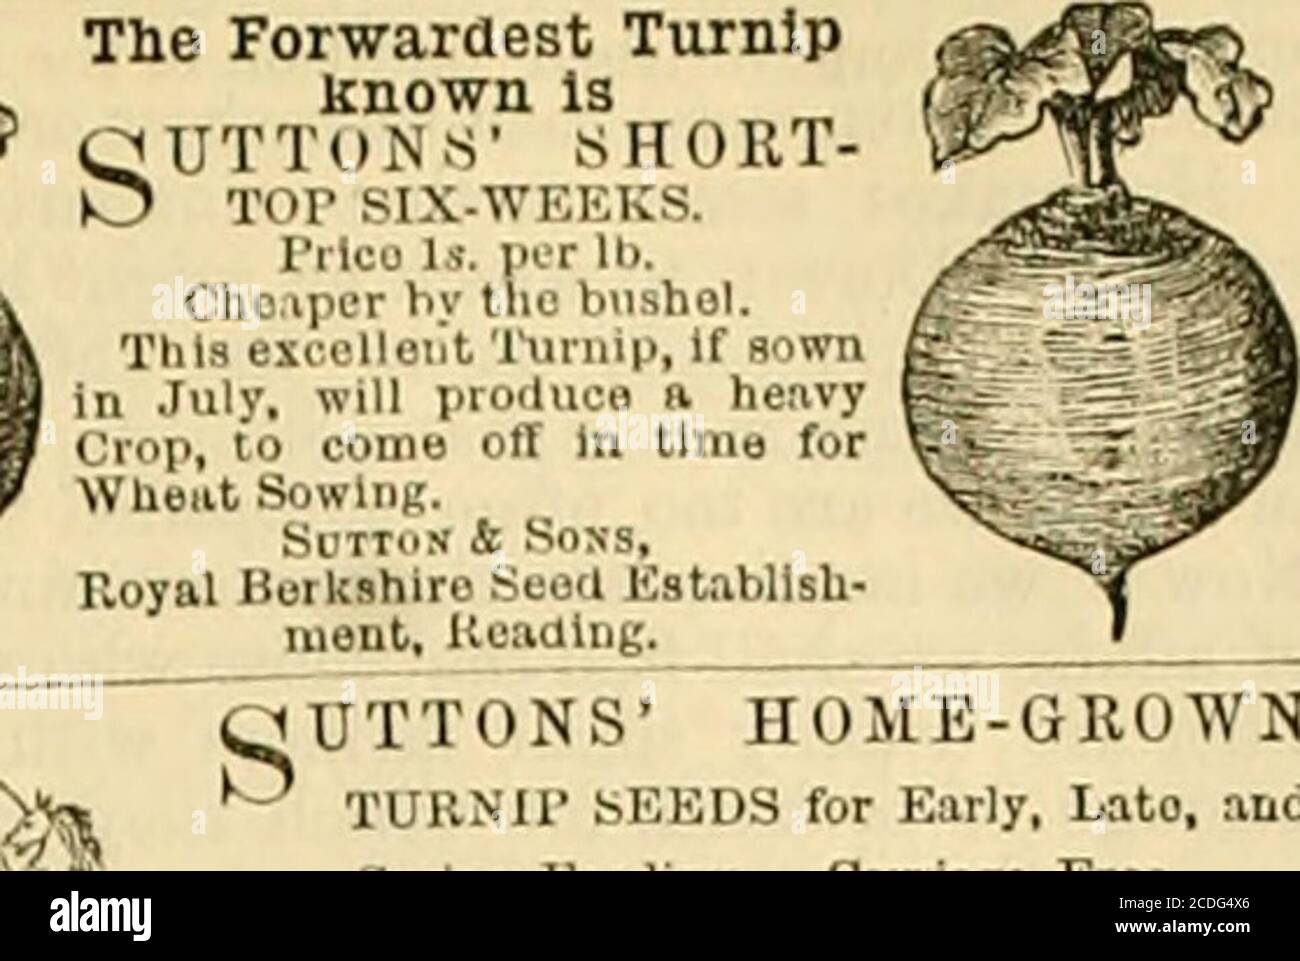 . The Gardeners' chronicle and agricultural gazette . The Forwardest TurnipKnown is iriTii.Ns SHORT-. HOME-GROWNTURNIP SEEDS for Early. Lato, andSpring Feeding. Carriage Free. WHITE TANKARD TURNIP. RED TANKARD TURNIP. GREEN TANKARD TURNIP. LINCOLNSHIRE RED PARAGON do. BUTTONSIMPERIAL GREEN OLOBEdo. SUTTONS SHORT-TOP SIX-WEEKS do. At very moderate Prices. Lowest Piper Bushel (Carriage Free) en applic ScTTos i Sons,Secdsnlon to tho Queen, Reading, I THe Best Turnip for Present Sowing. t Street, London, S.W R. Rtder, Esq., Managing DU-ector, 3 Pt rpi THE PAXTON GARDEN MANURE is the mo.economical Stock Photo